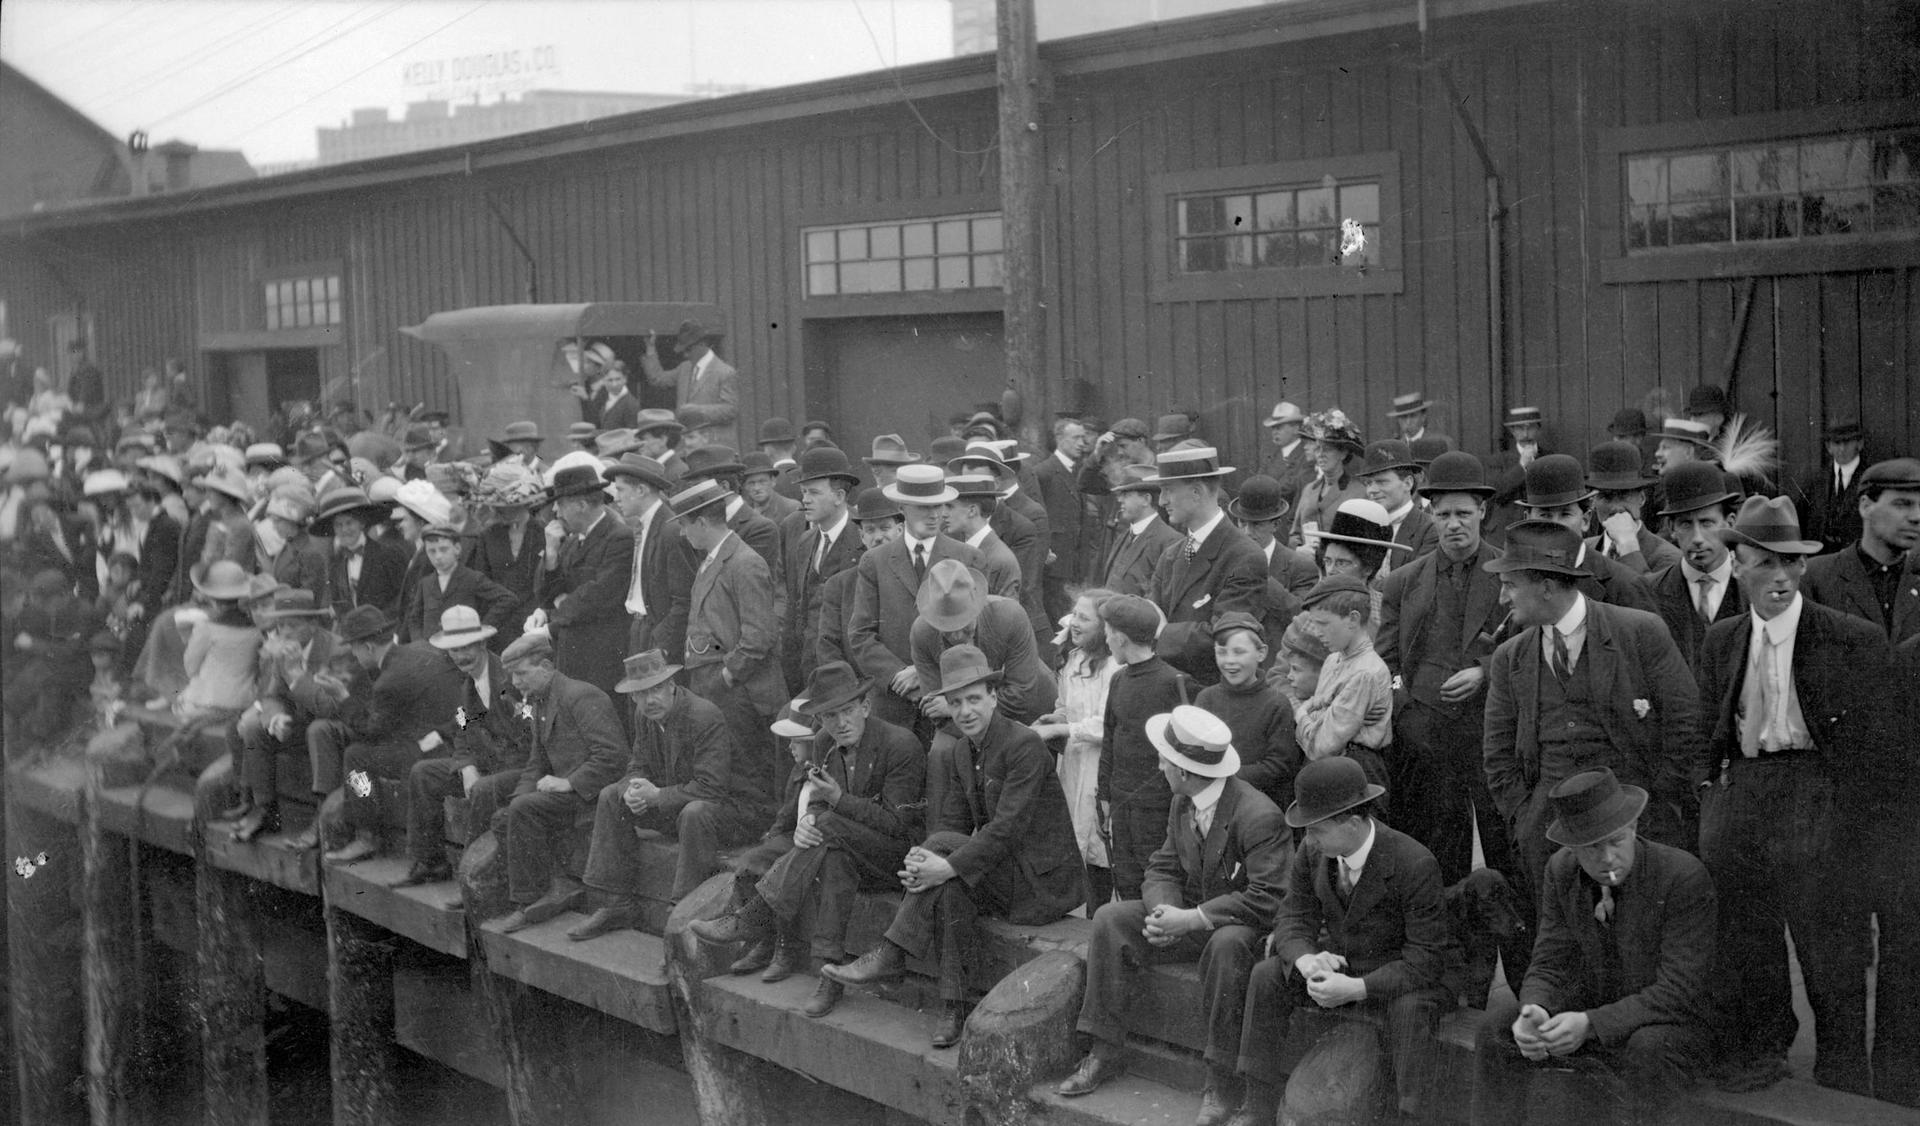 Onlookers on the wharf in Vancouver watching the Komagata Maru